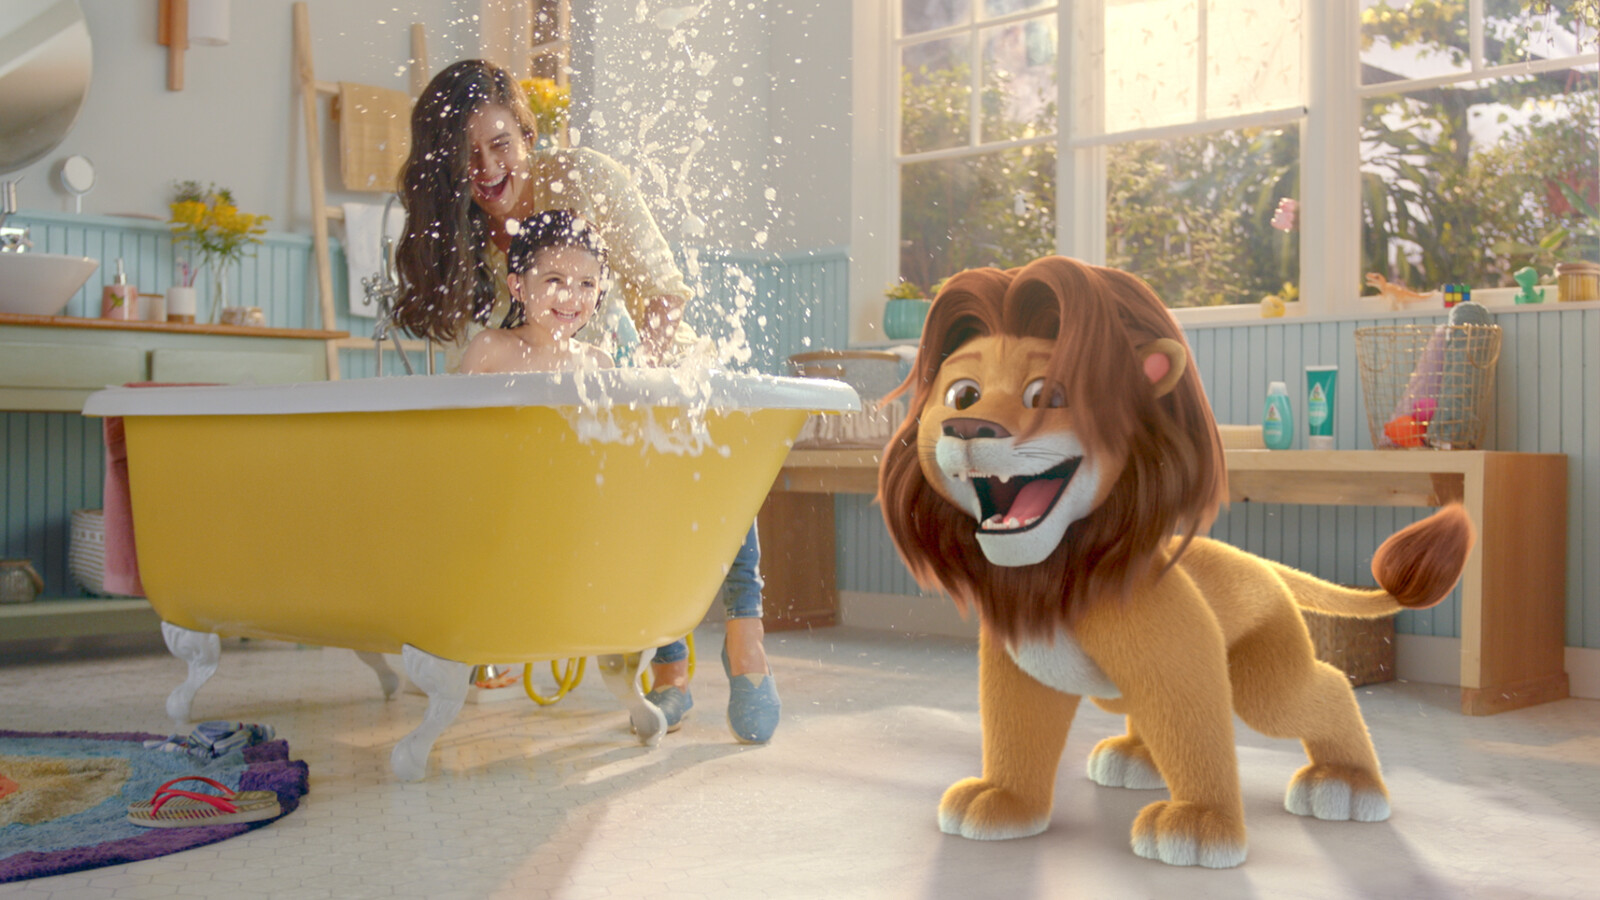  Lion Grooming and Lookdev - Johnson & Johnson Advertising Campaign @O2 Filmes